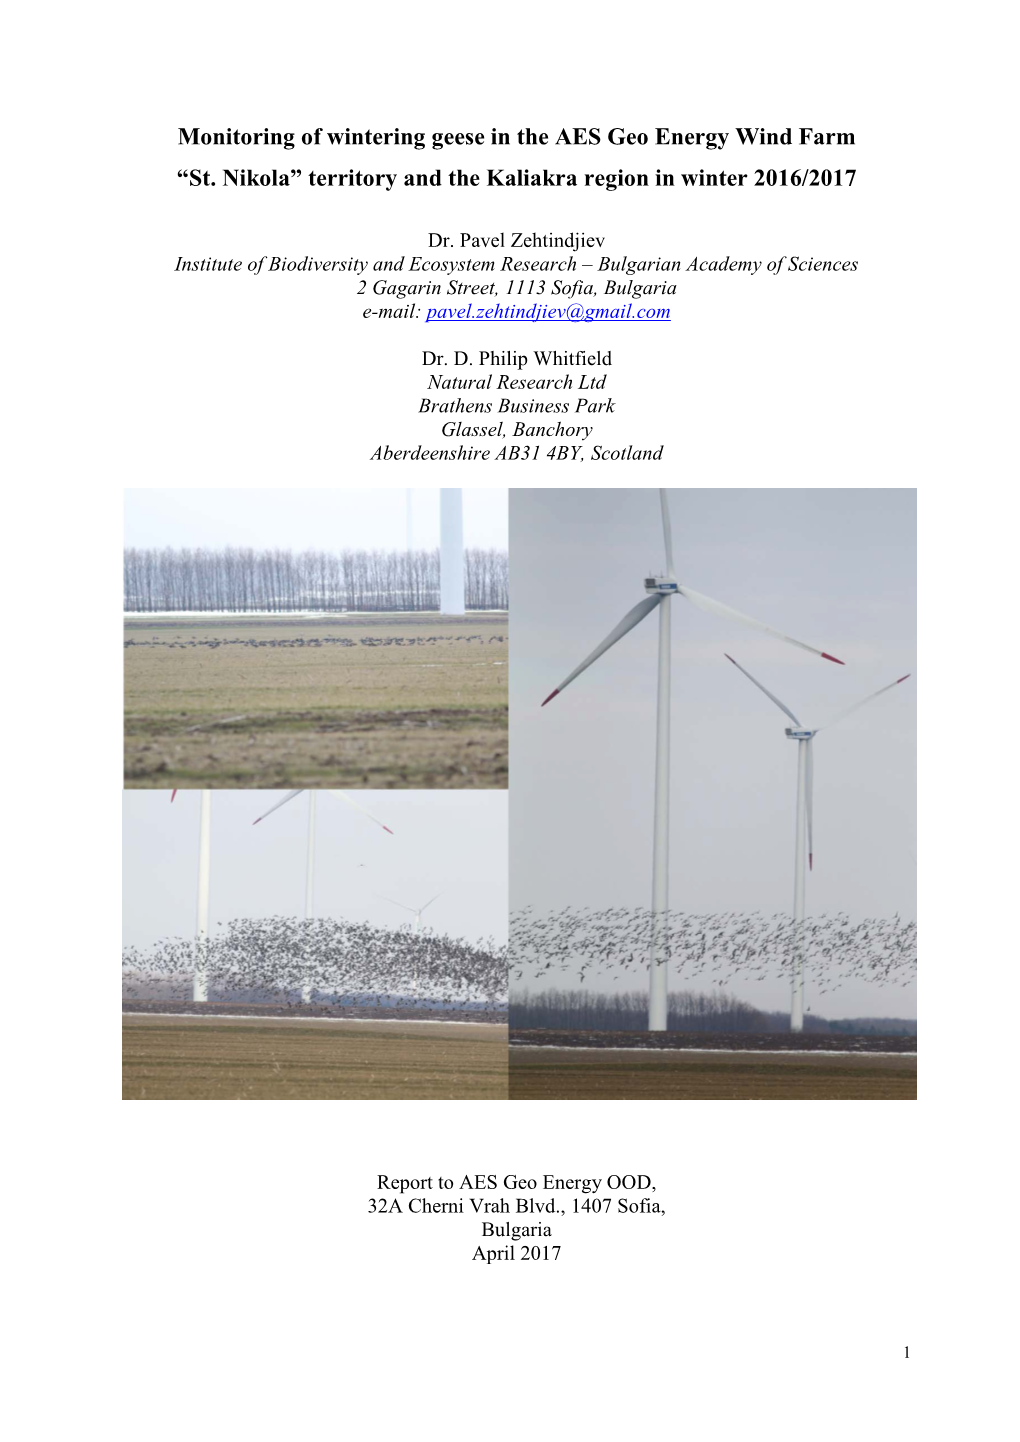 Monitoring of Wintering Geese in the AES Geo Energy Wind Farm “St